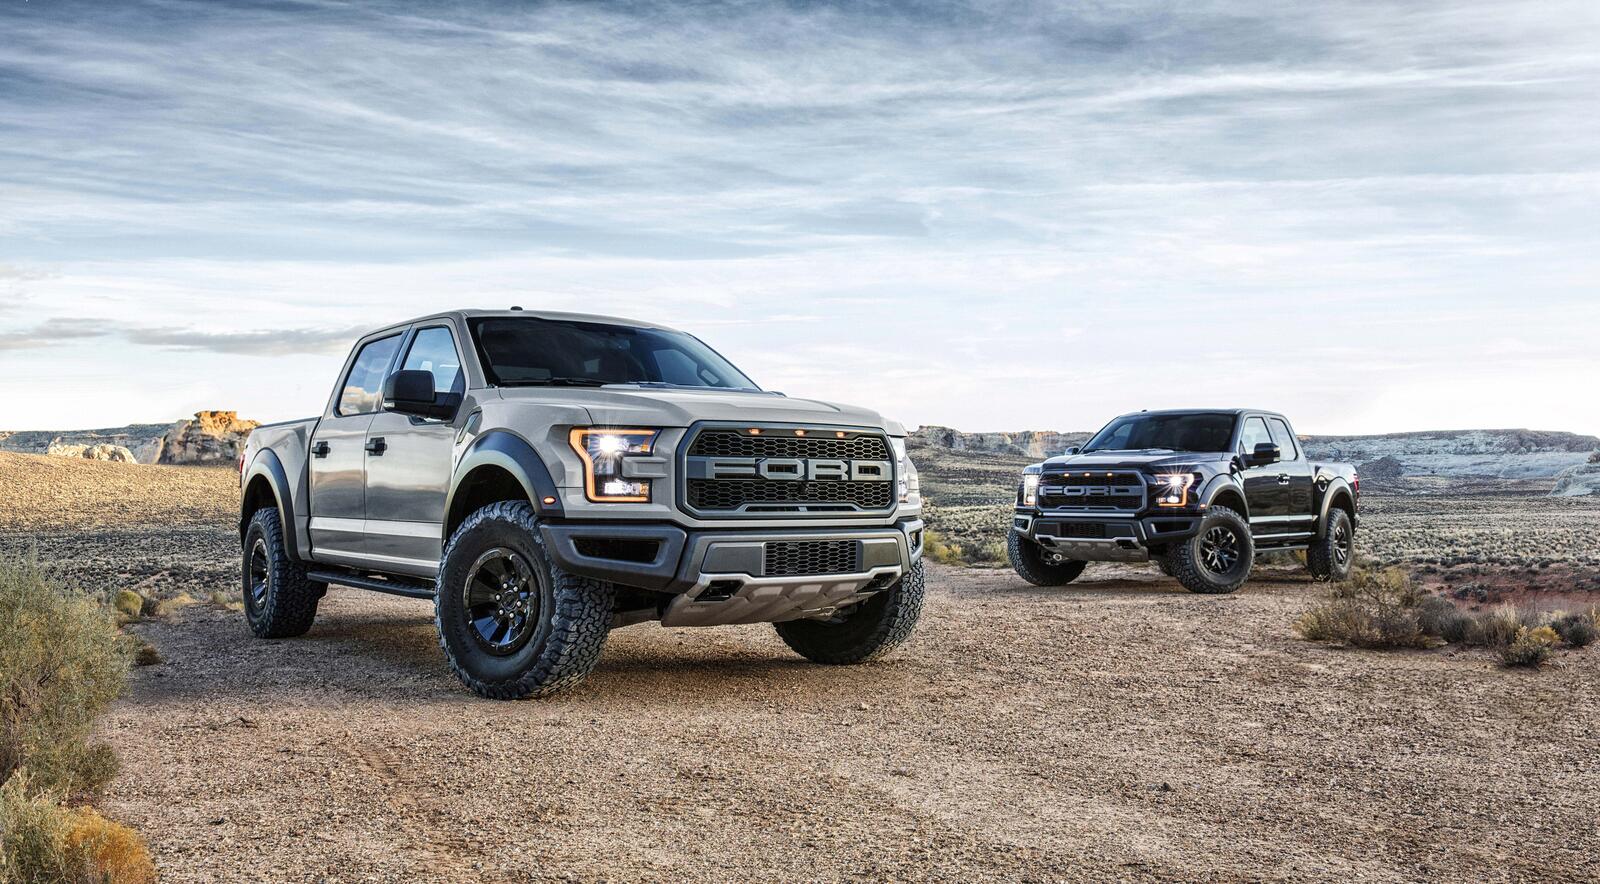 Wallpapers Ford Ford Raptor cars on the desktop